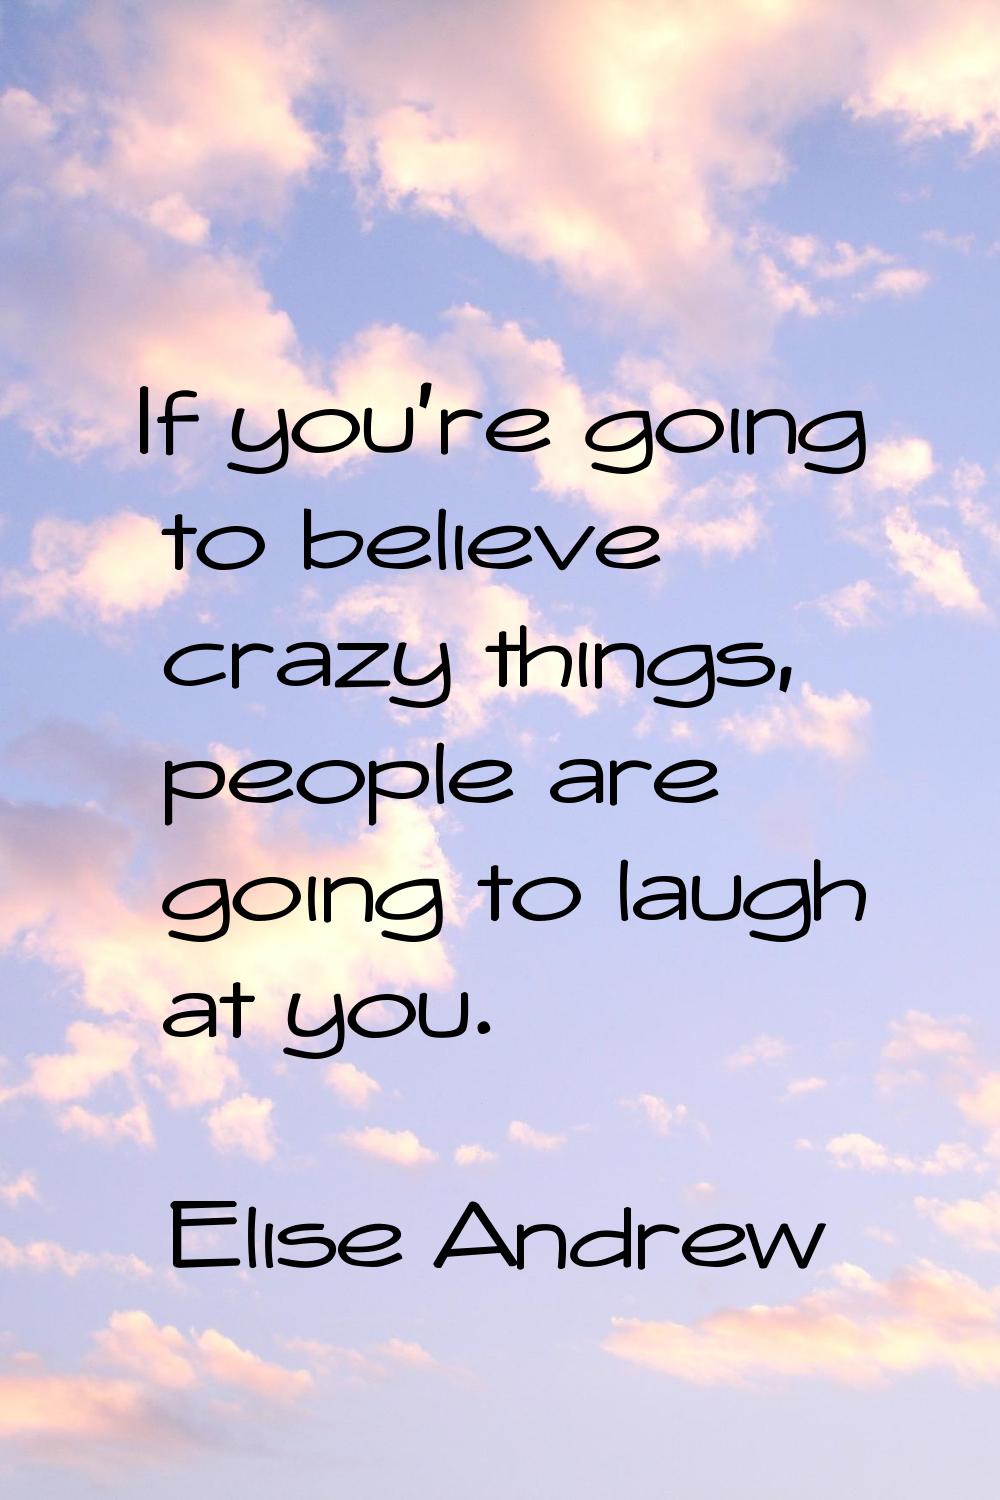 If you're going to believe crazy things, people are going to laugh at you.